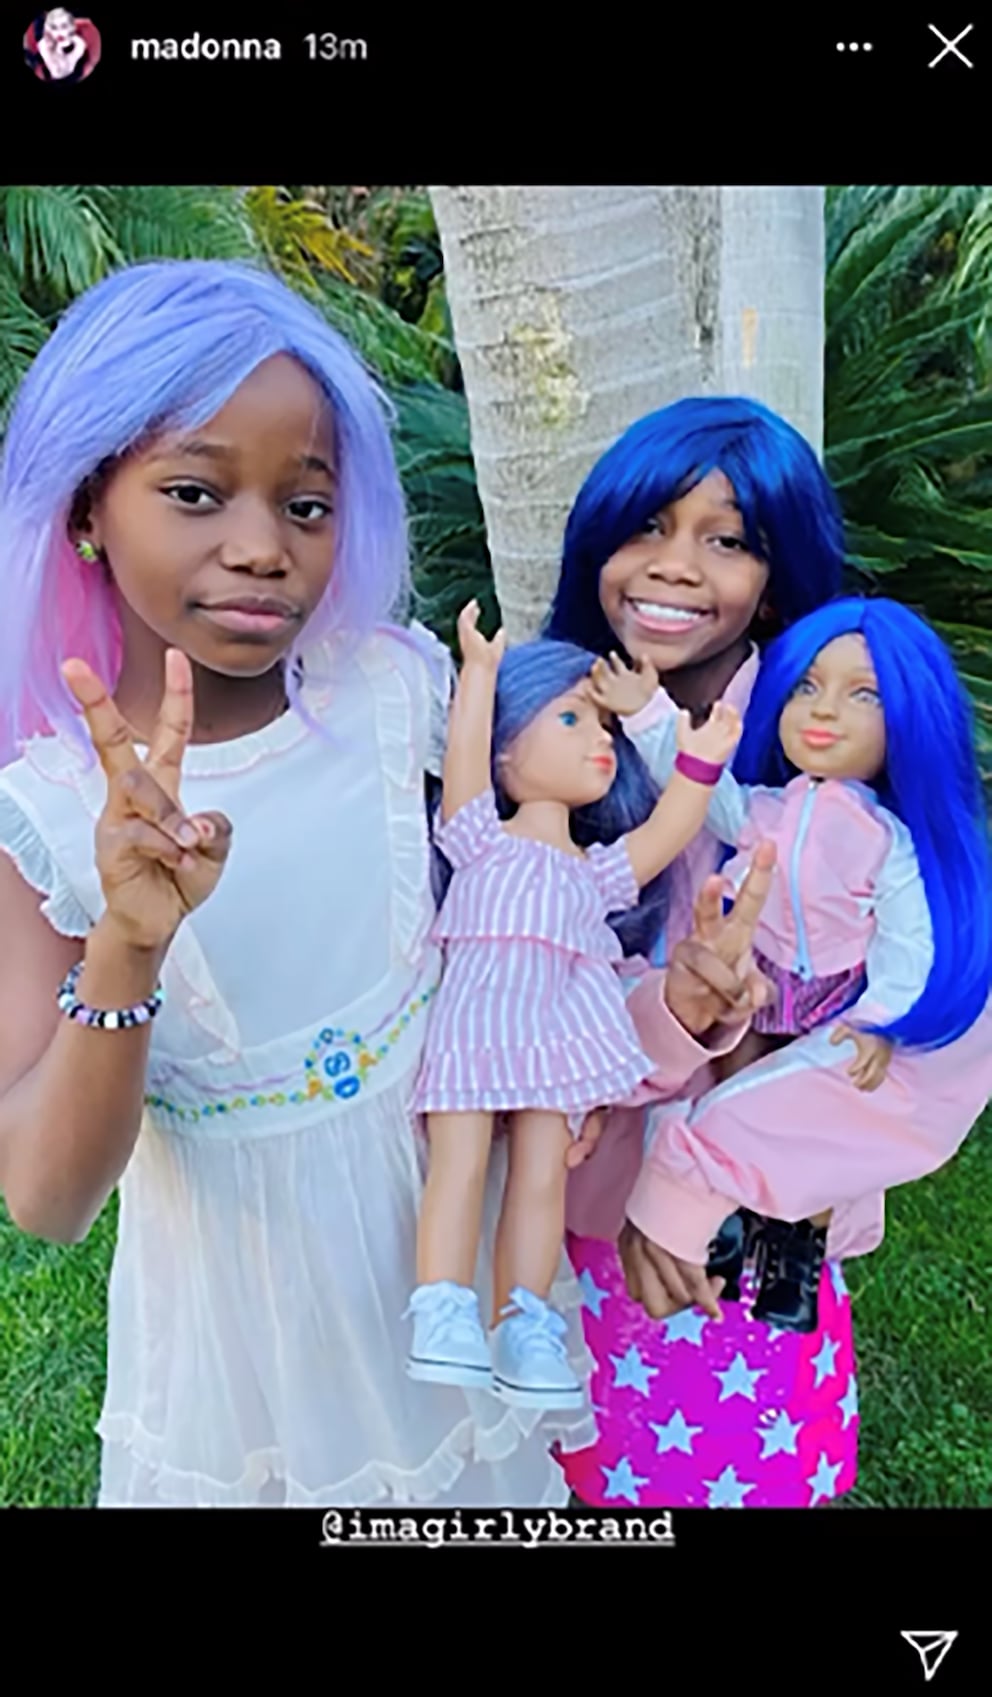 Madonna’s twin daughters, Estere and Stelle, are also fans of the Swiss fashion dolls.